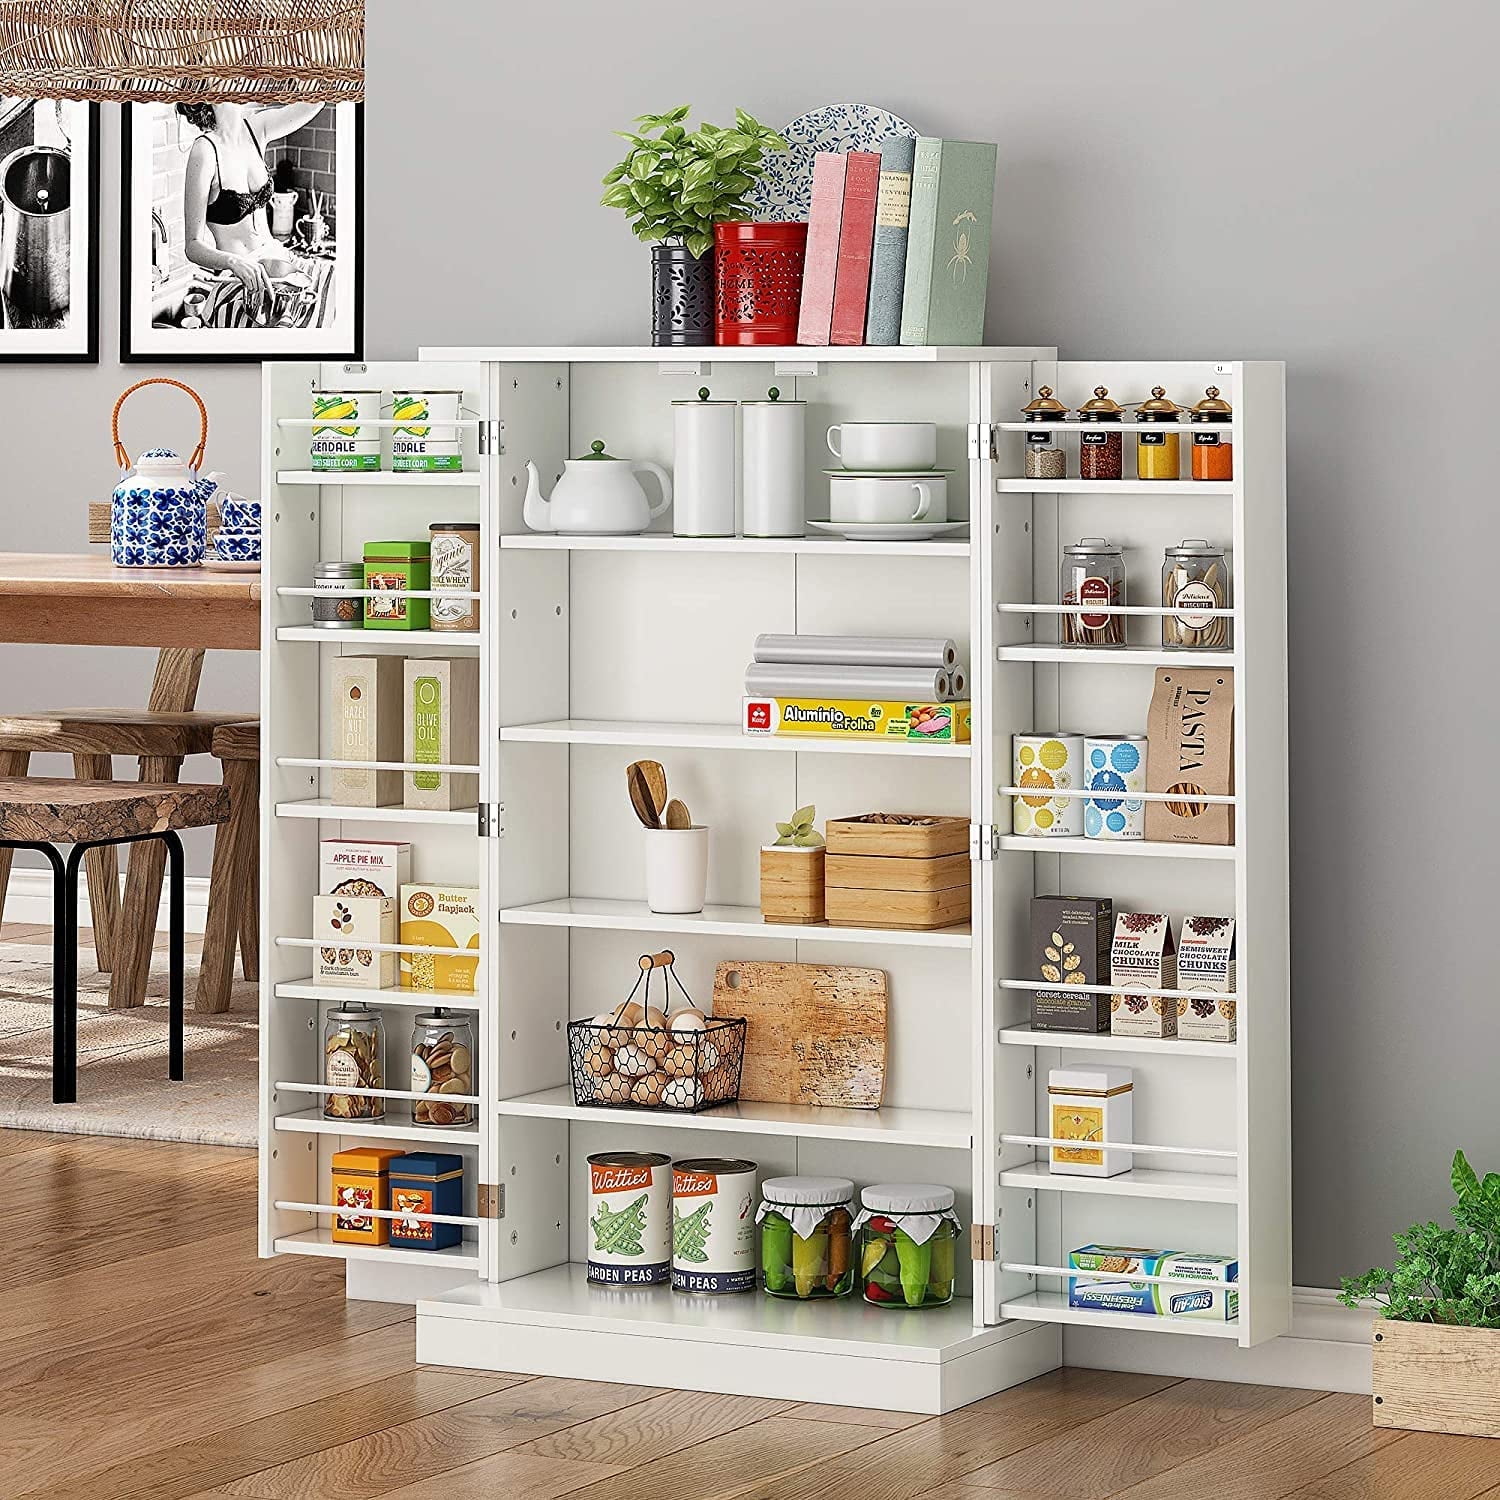 HOMEFORT 41 Kitchen Pantry Farmhouse Pantry Cabinet Storage Cabinet With Doors And Adjustable Shelves 41 H X 23 2 W X 12 D White 74d97fdb 7a58 42fd Ab46 A176182a3abc.93ef079d8664da80de724d339d96e15a 